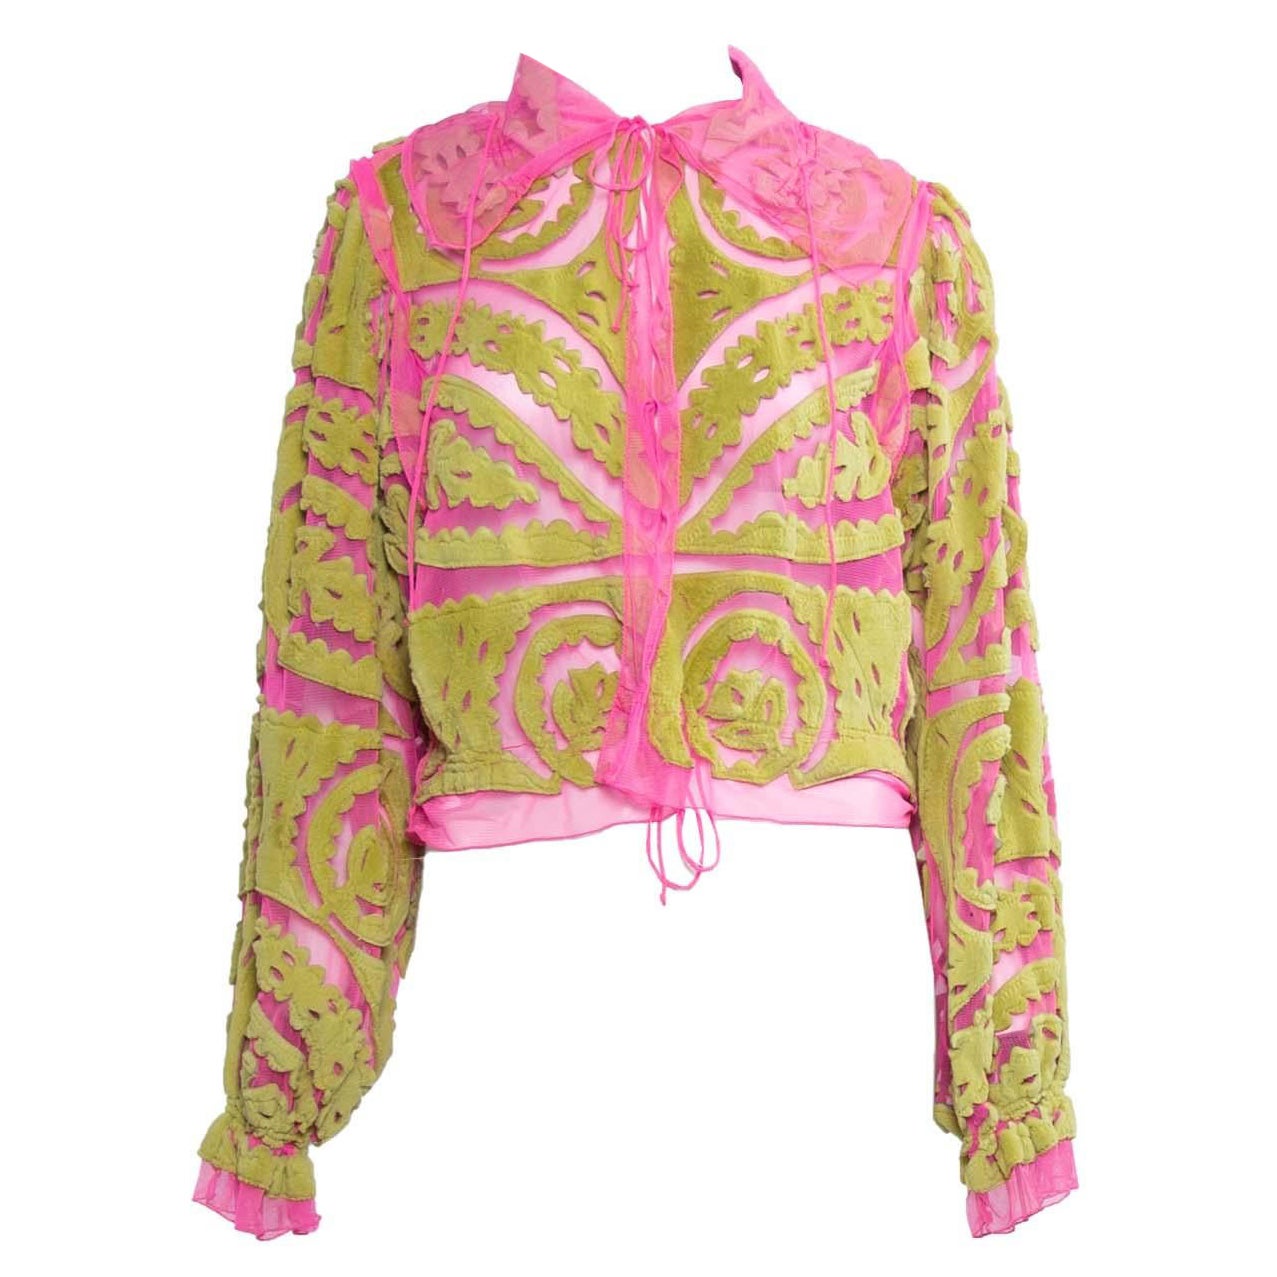 S/S 2000 Fendi by Karl Lagerfeld Neon Pink Blouse with Green Rabbit Fur Accents